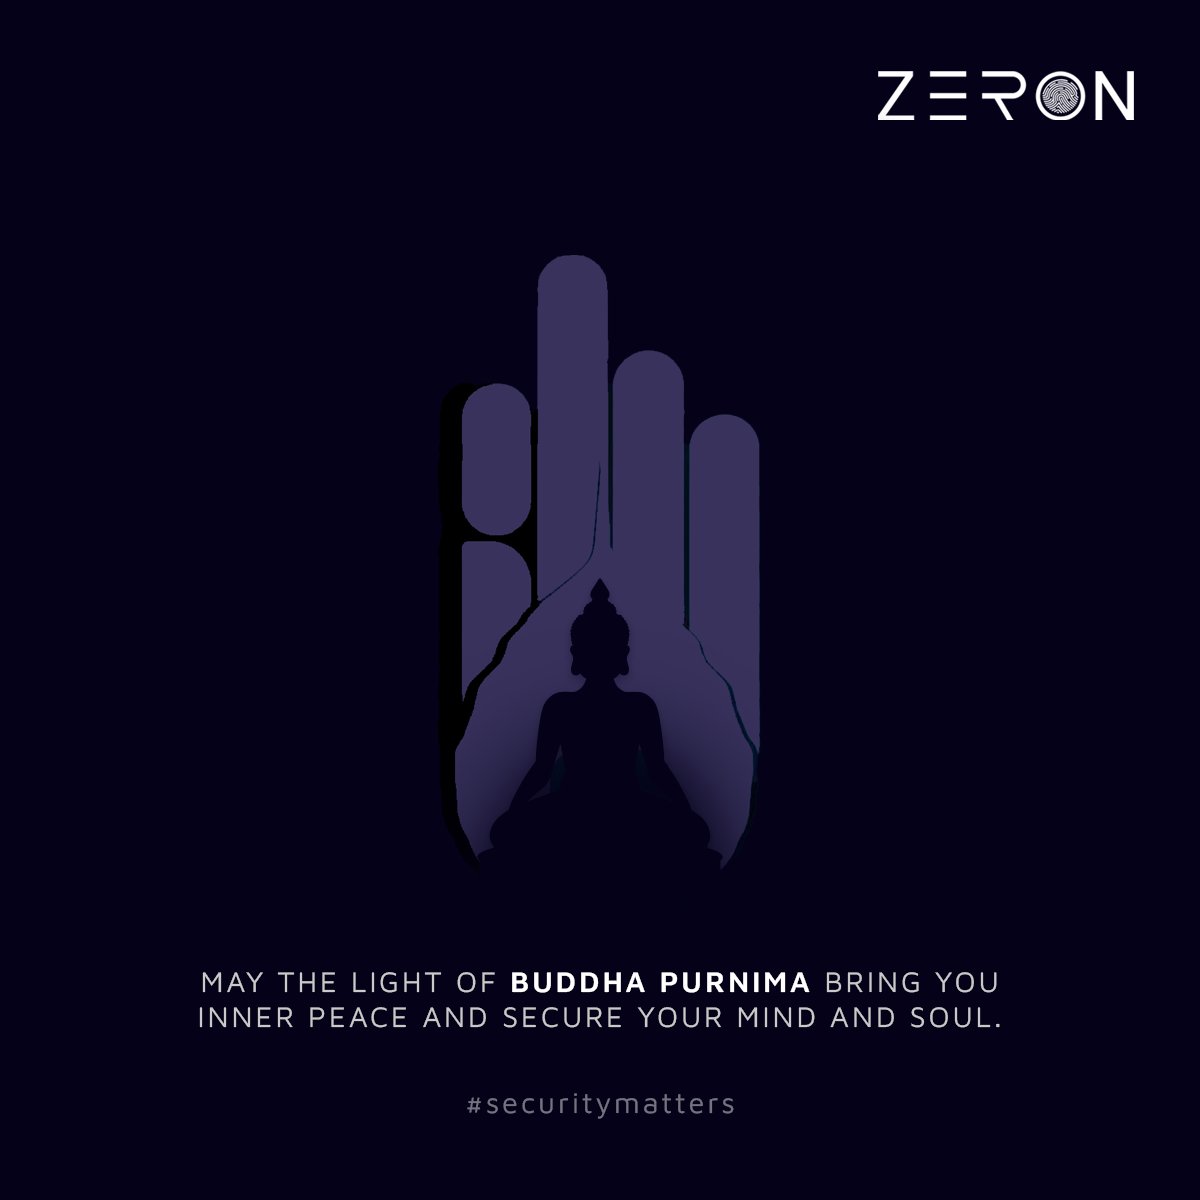 May this auspicious occasion bring you a sense of peace and security. Wishing you a blessed Buddha Purnima filled with joy, contentment, and spiritual growth.

#buddhapurnima #lordbuddha #zeron #cybersecurity #cybersecurityservices #infosec #datasecurity #securitymatters